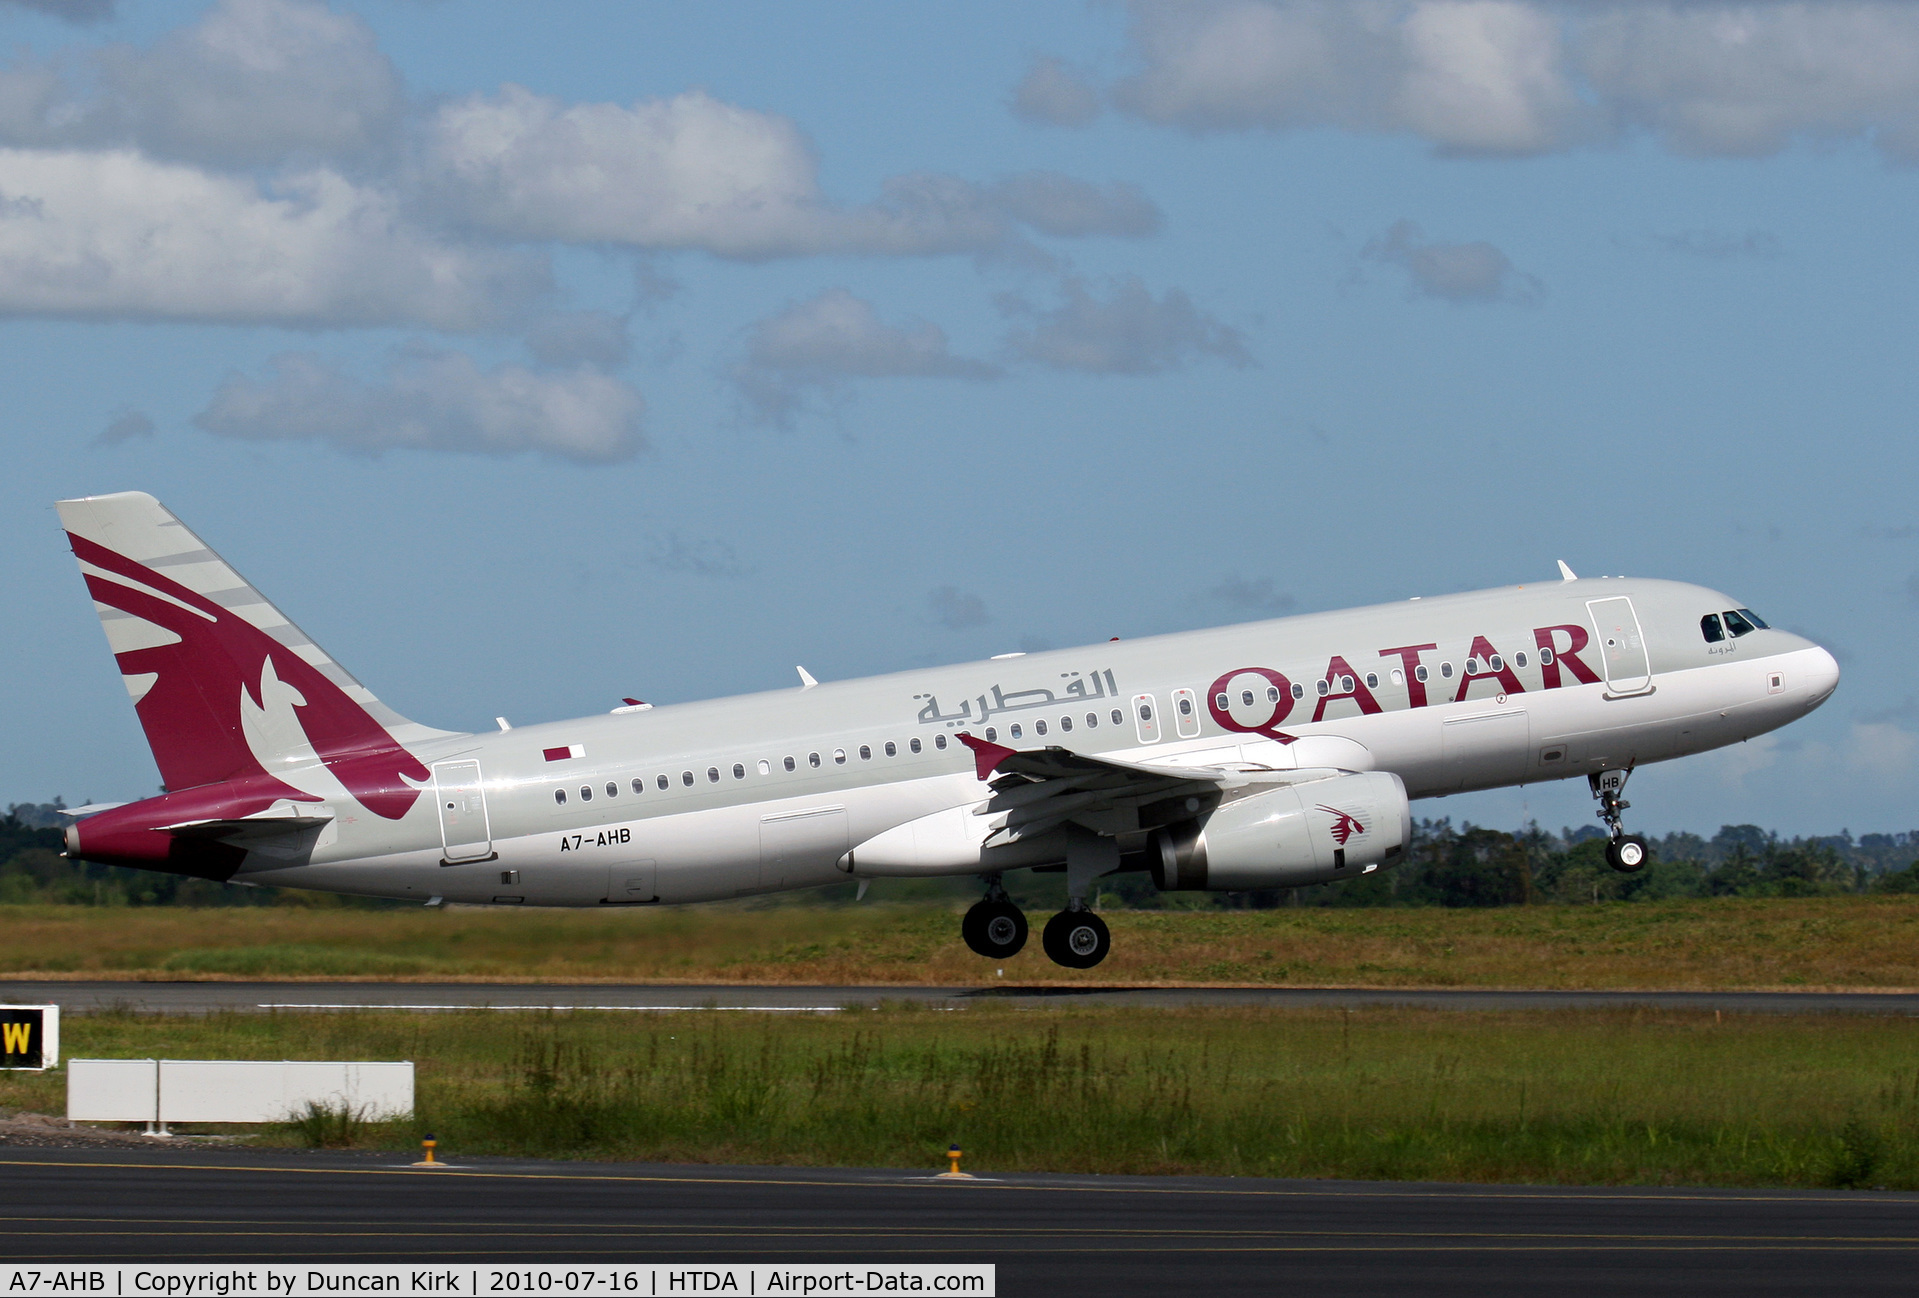 A7-AHB, 2009 Airbus A320-232 C/N 4130, Departing for Doha